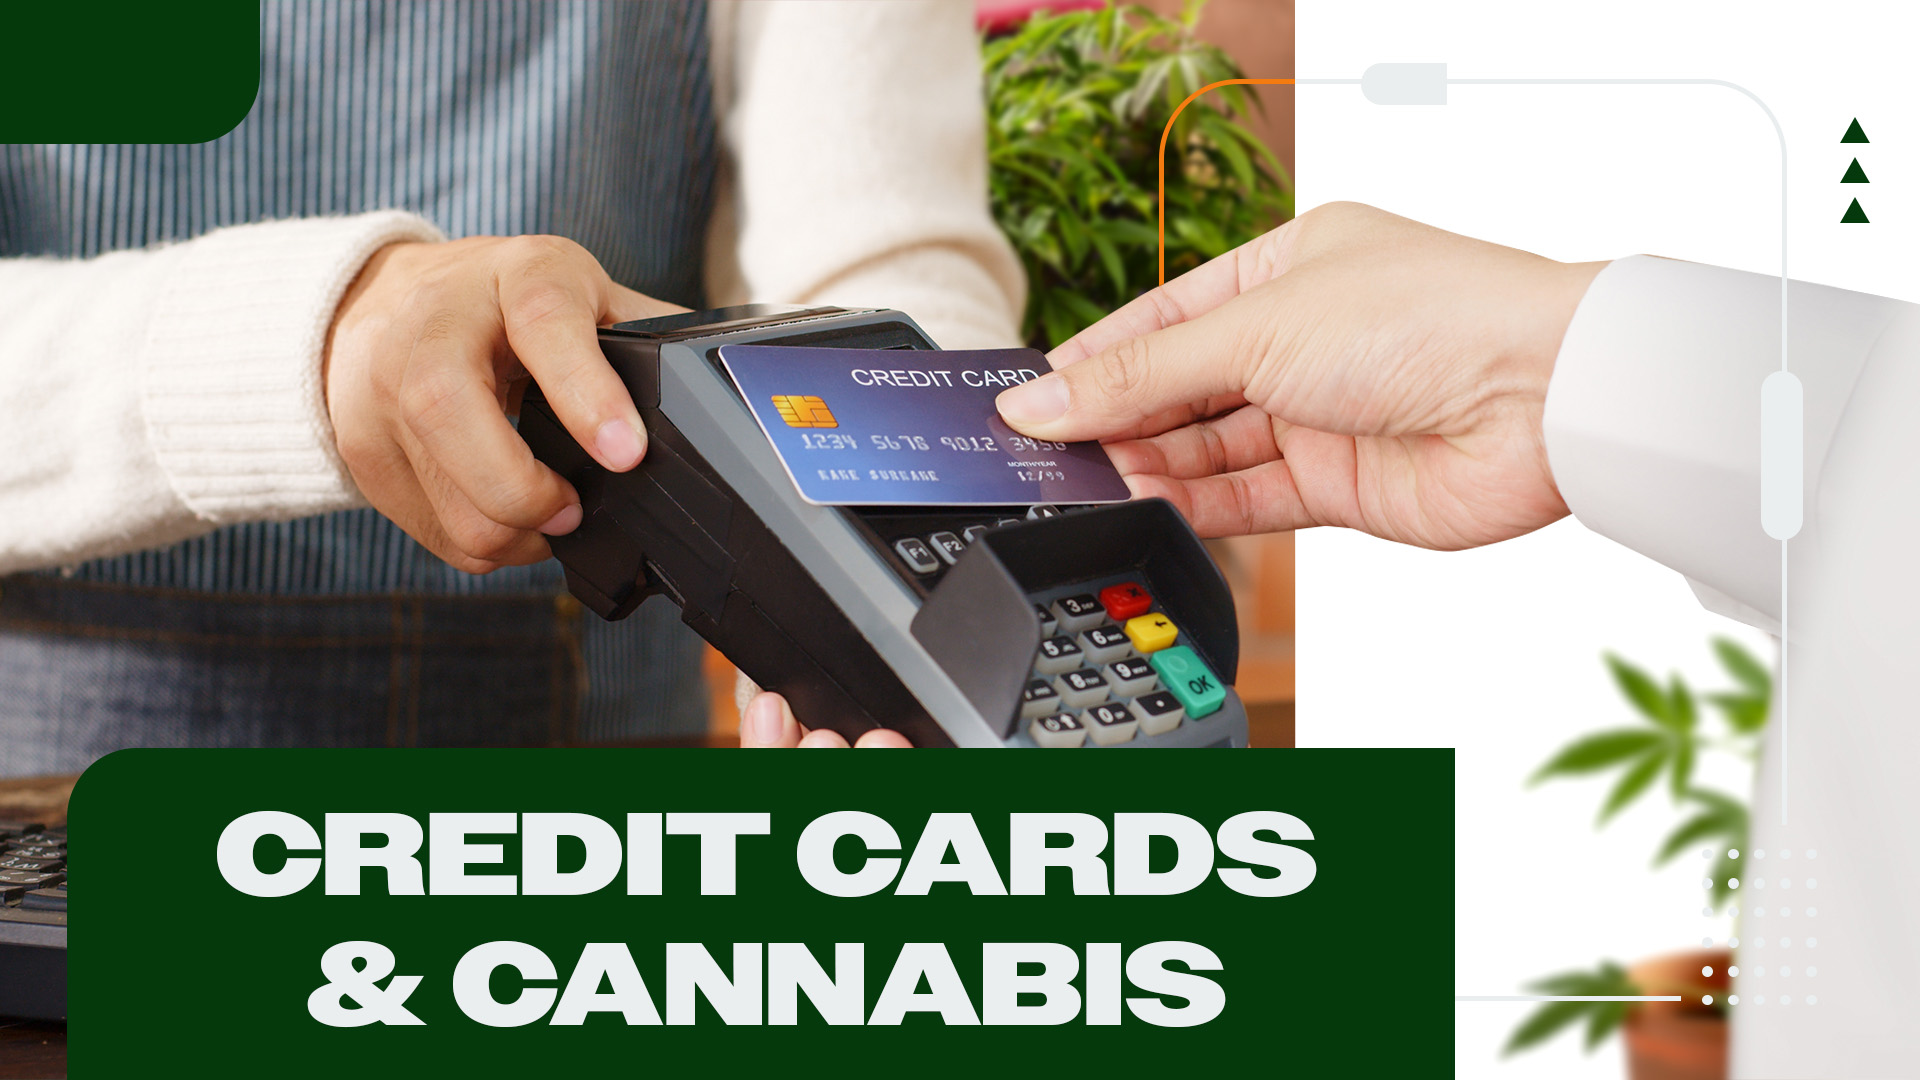 Can You Buy Weed With A Credit Card?